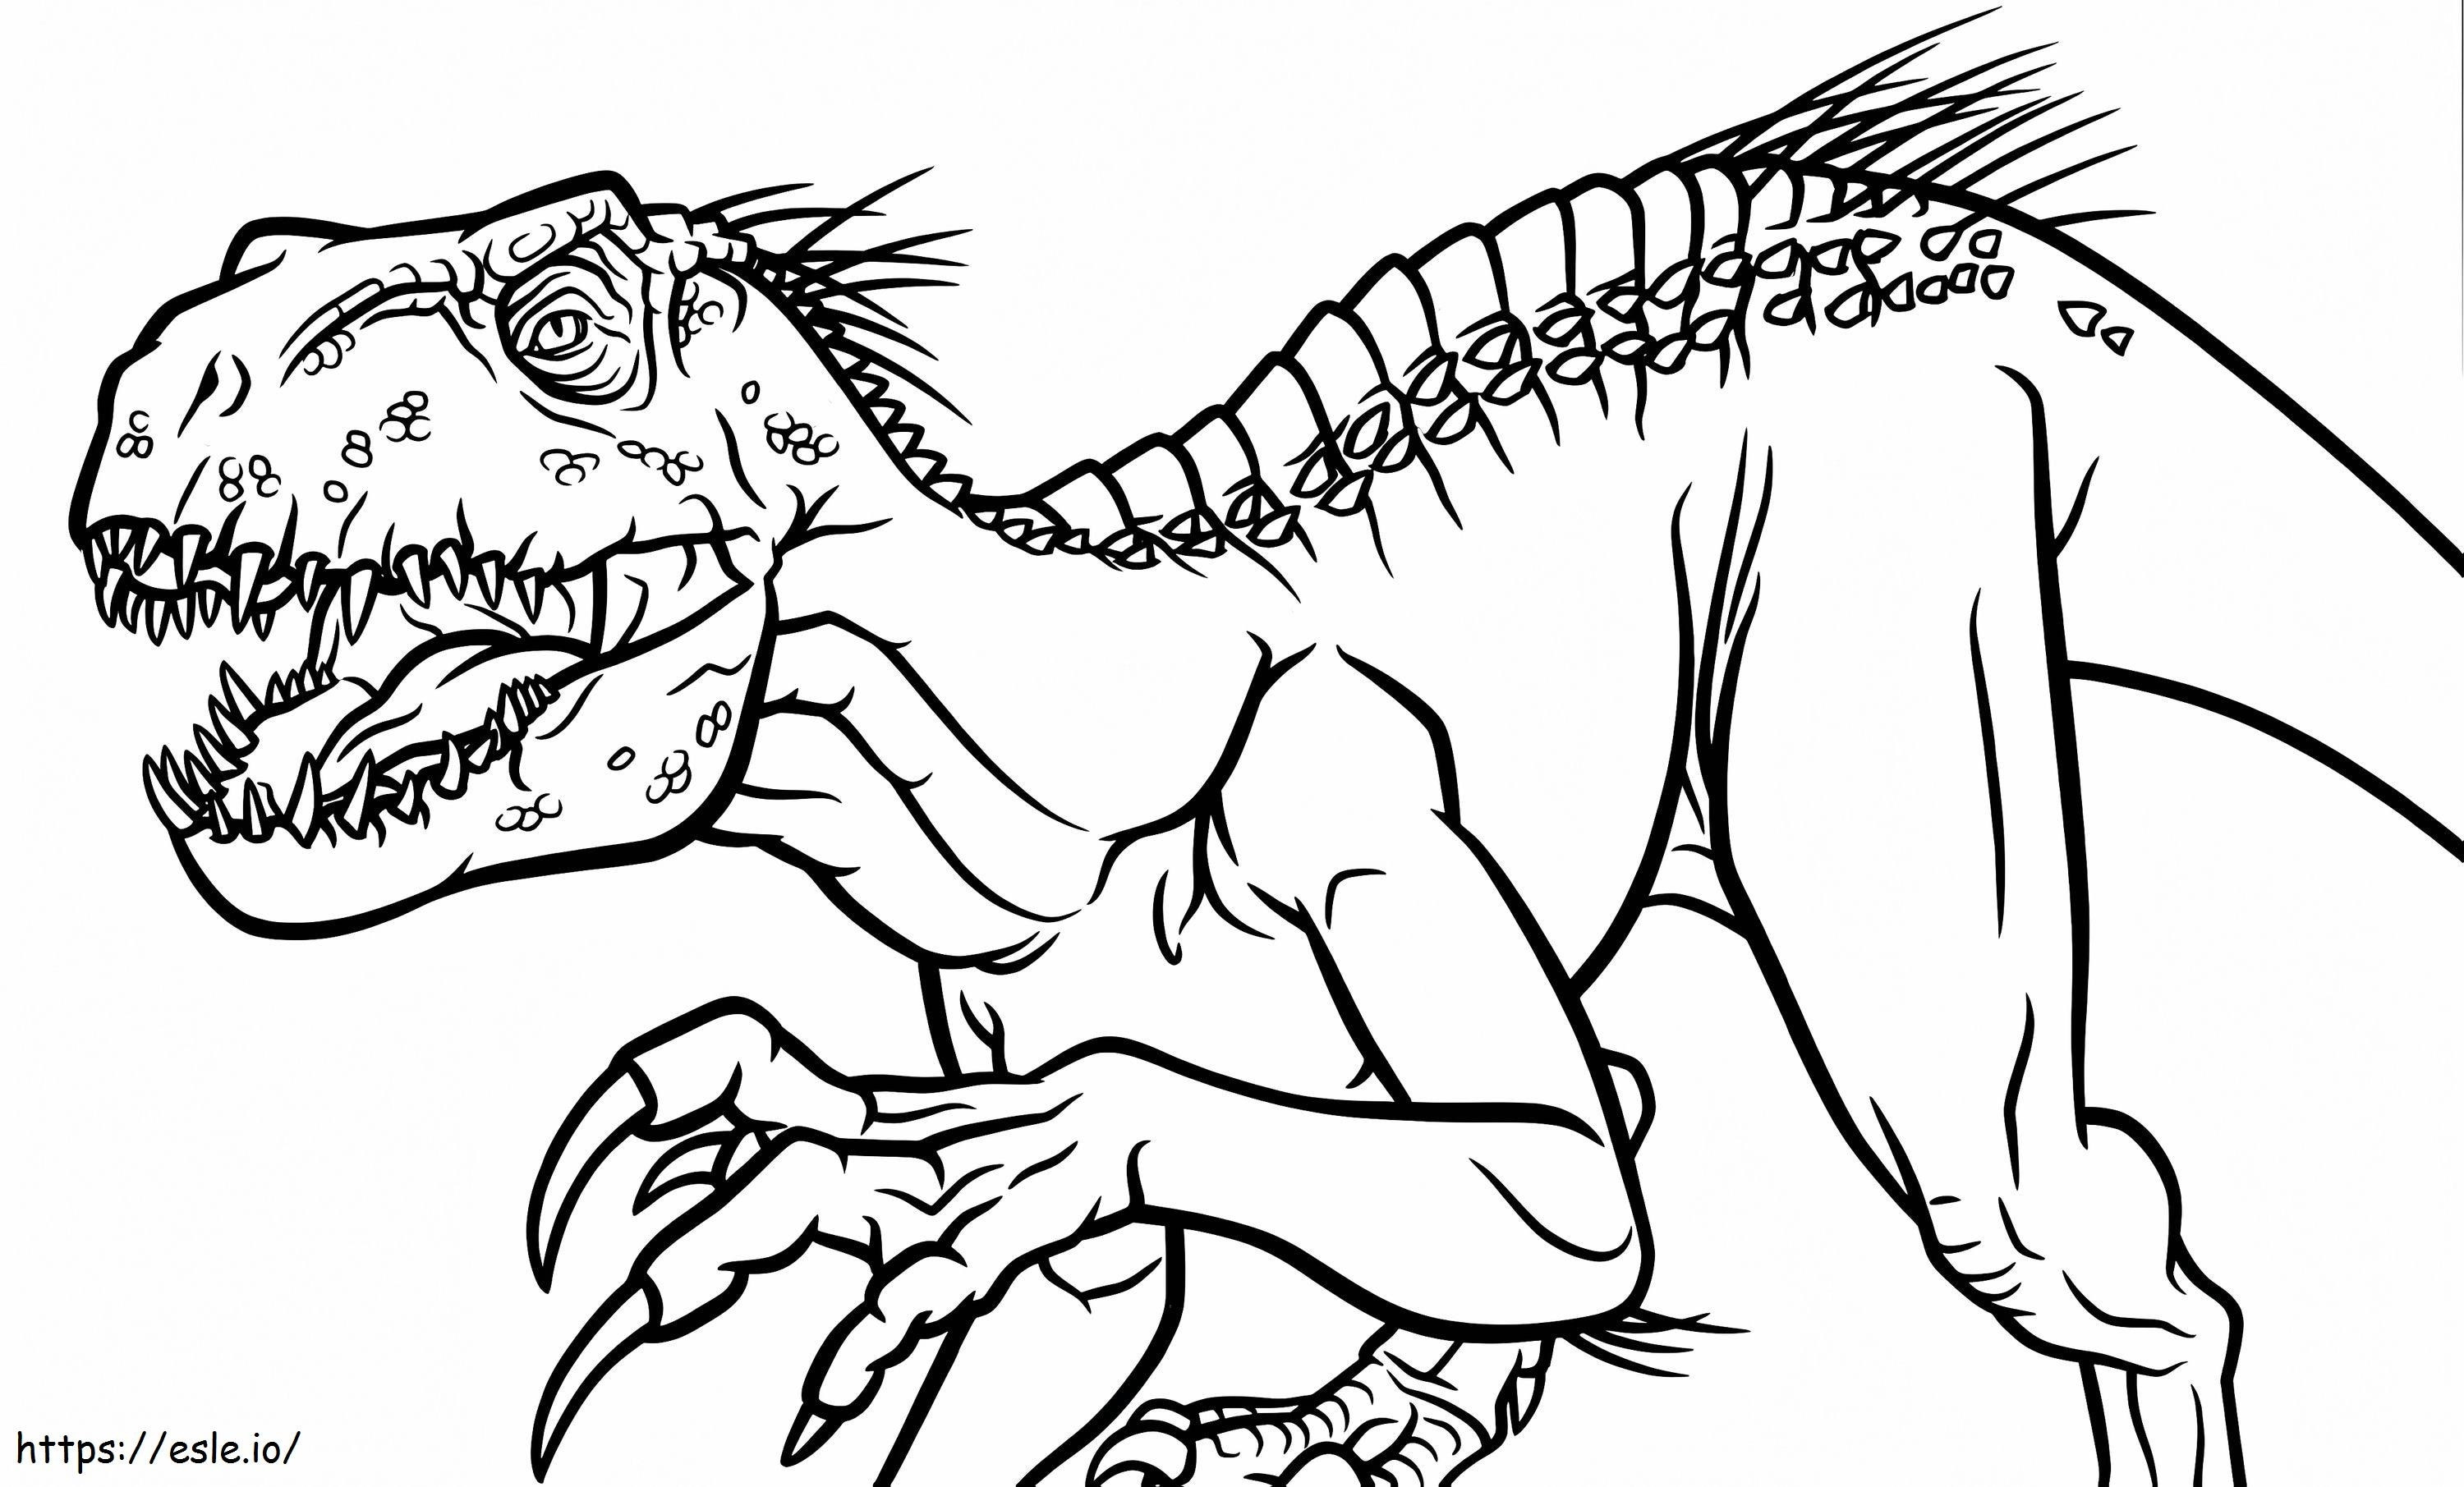 Indoraptor From Jurassic World coloring page